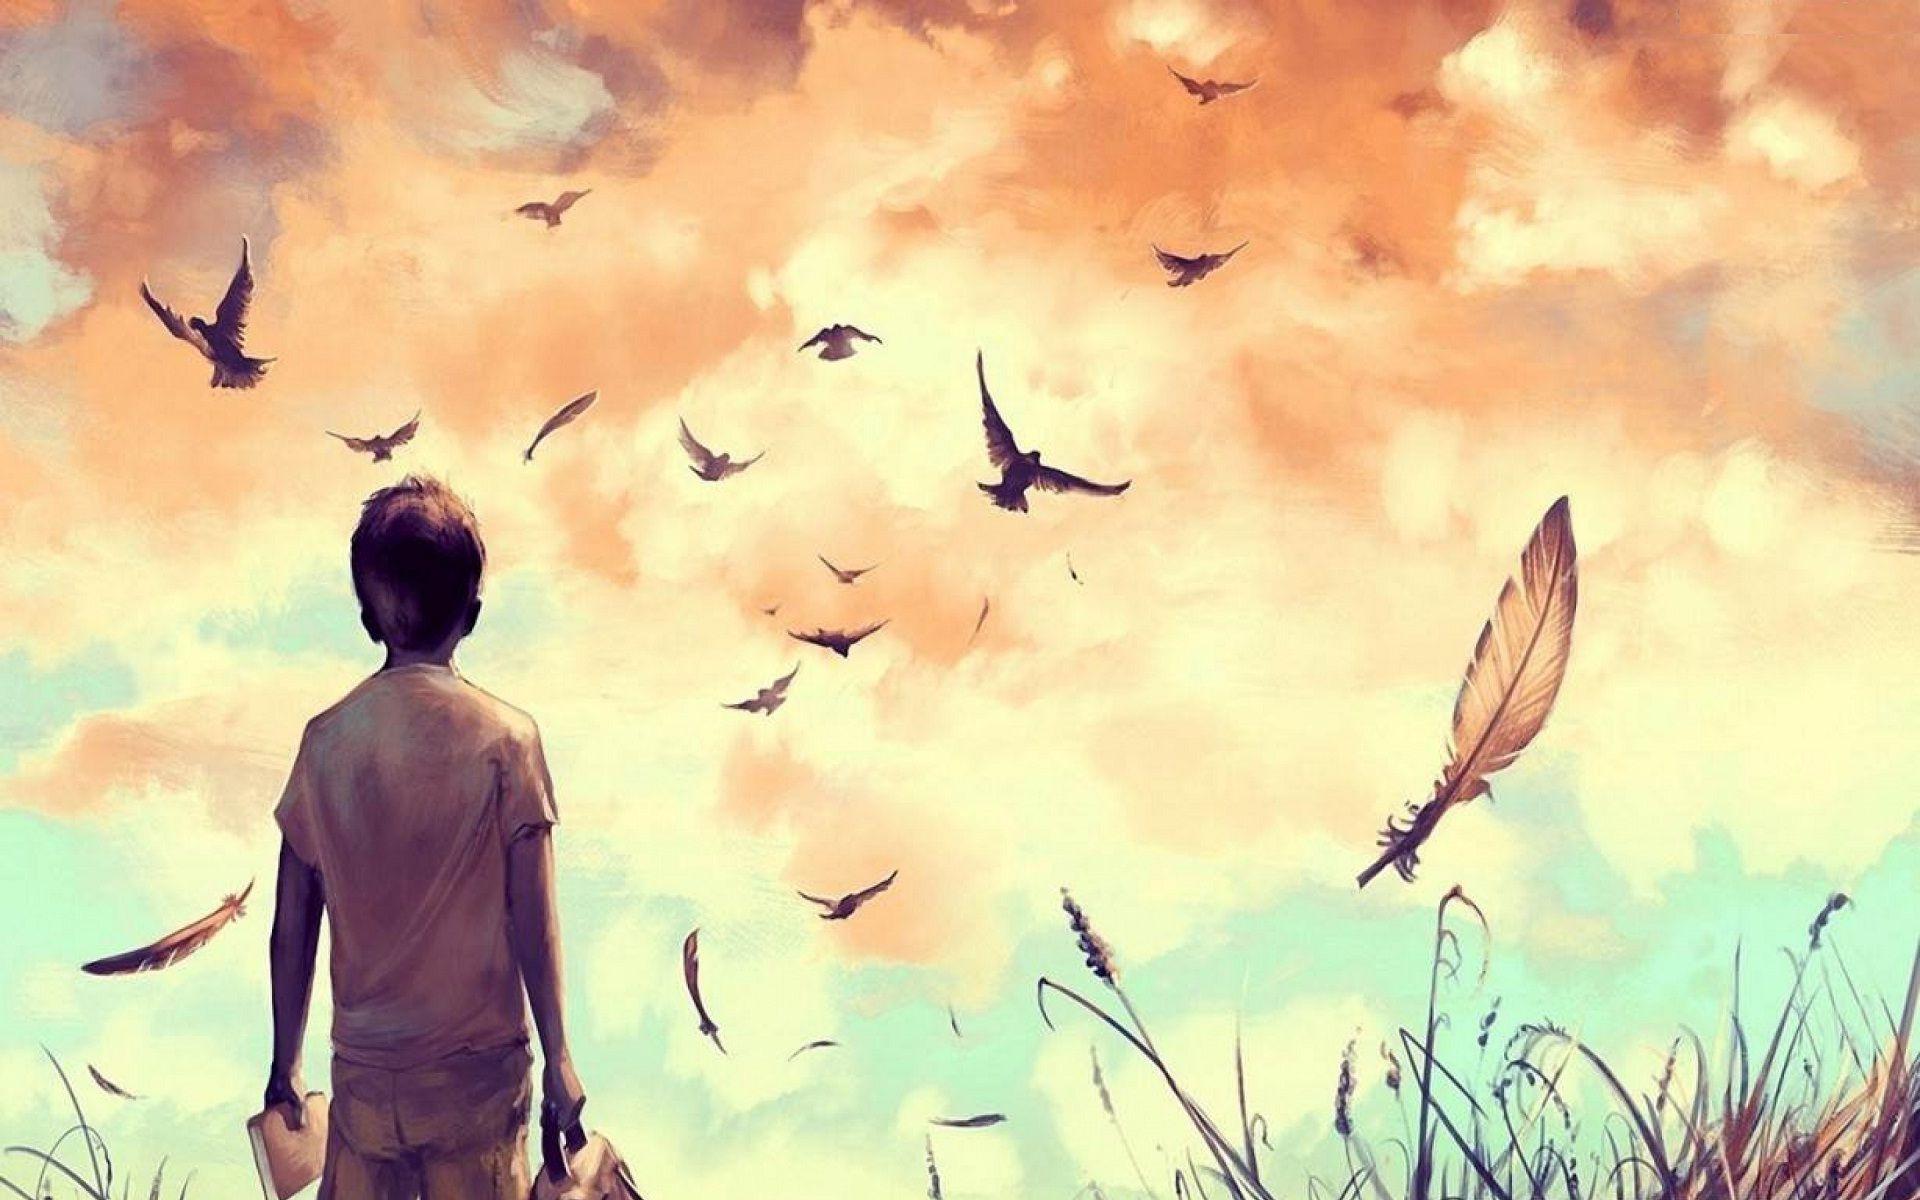 Alone boy and birds flying painting. HD Wallpaper Rocks